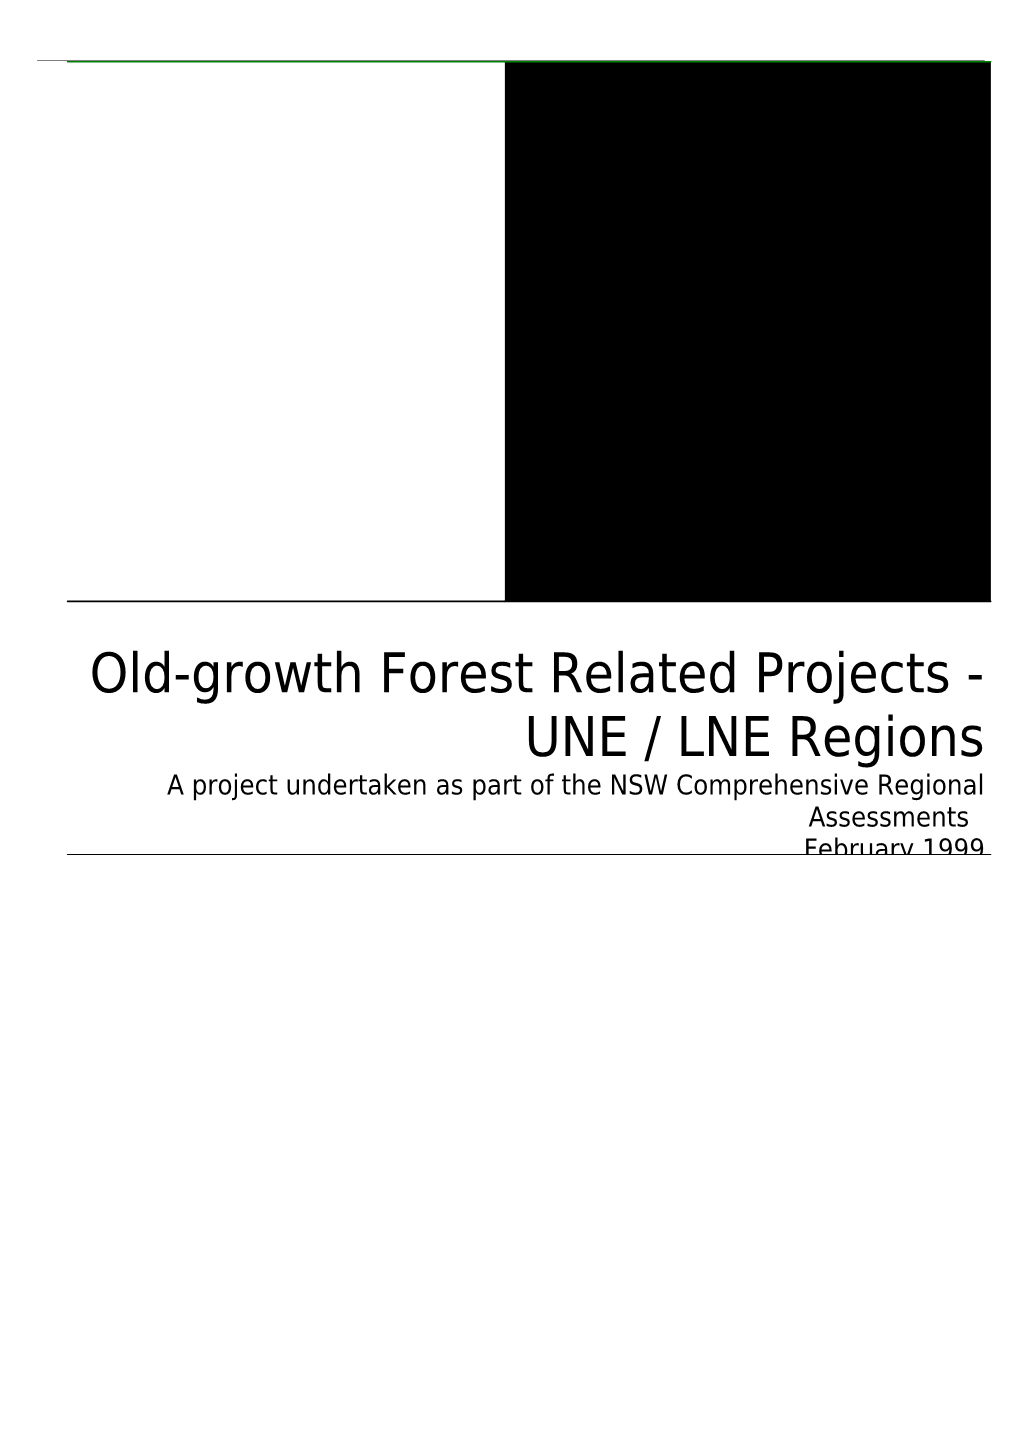 Old-Growth Forest Related Projects - UNE /LNE Regions